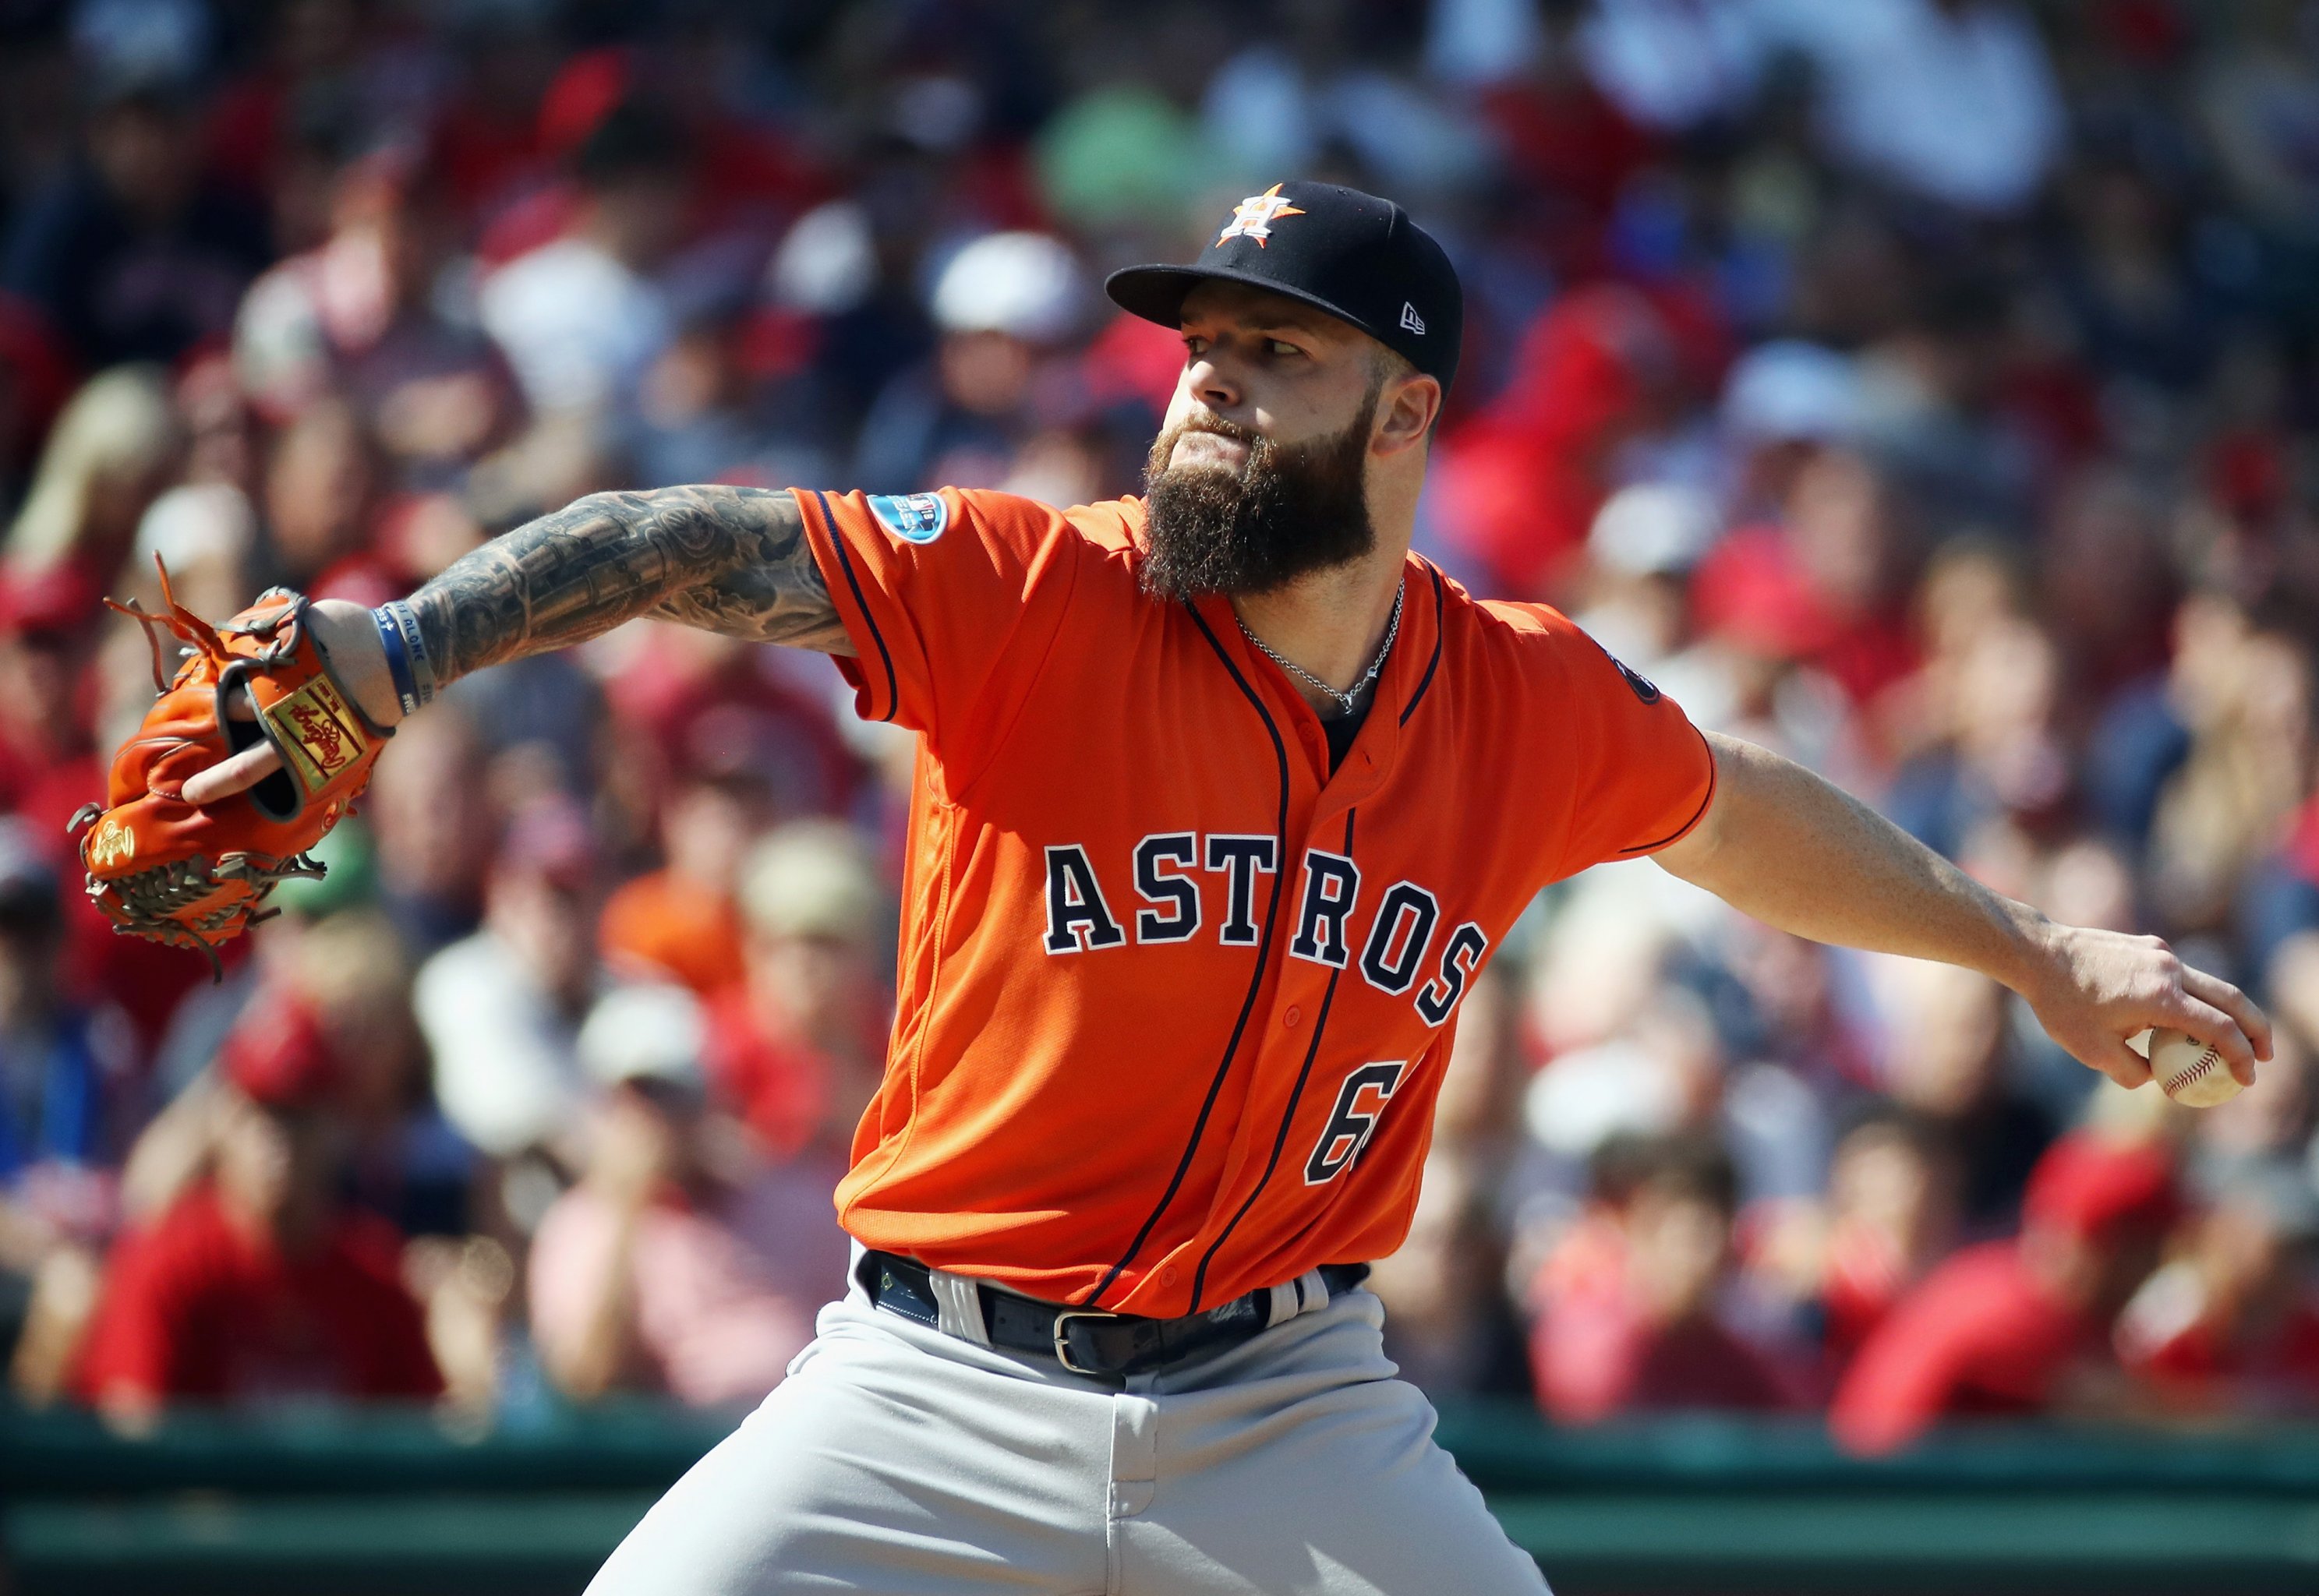 Boston Red Sox vs. Houston Astros in 2018 ALCS: Channel, game time